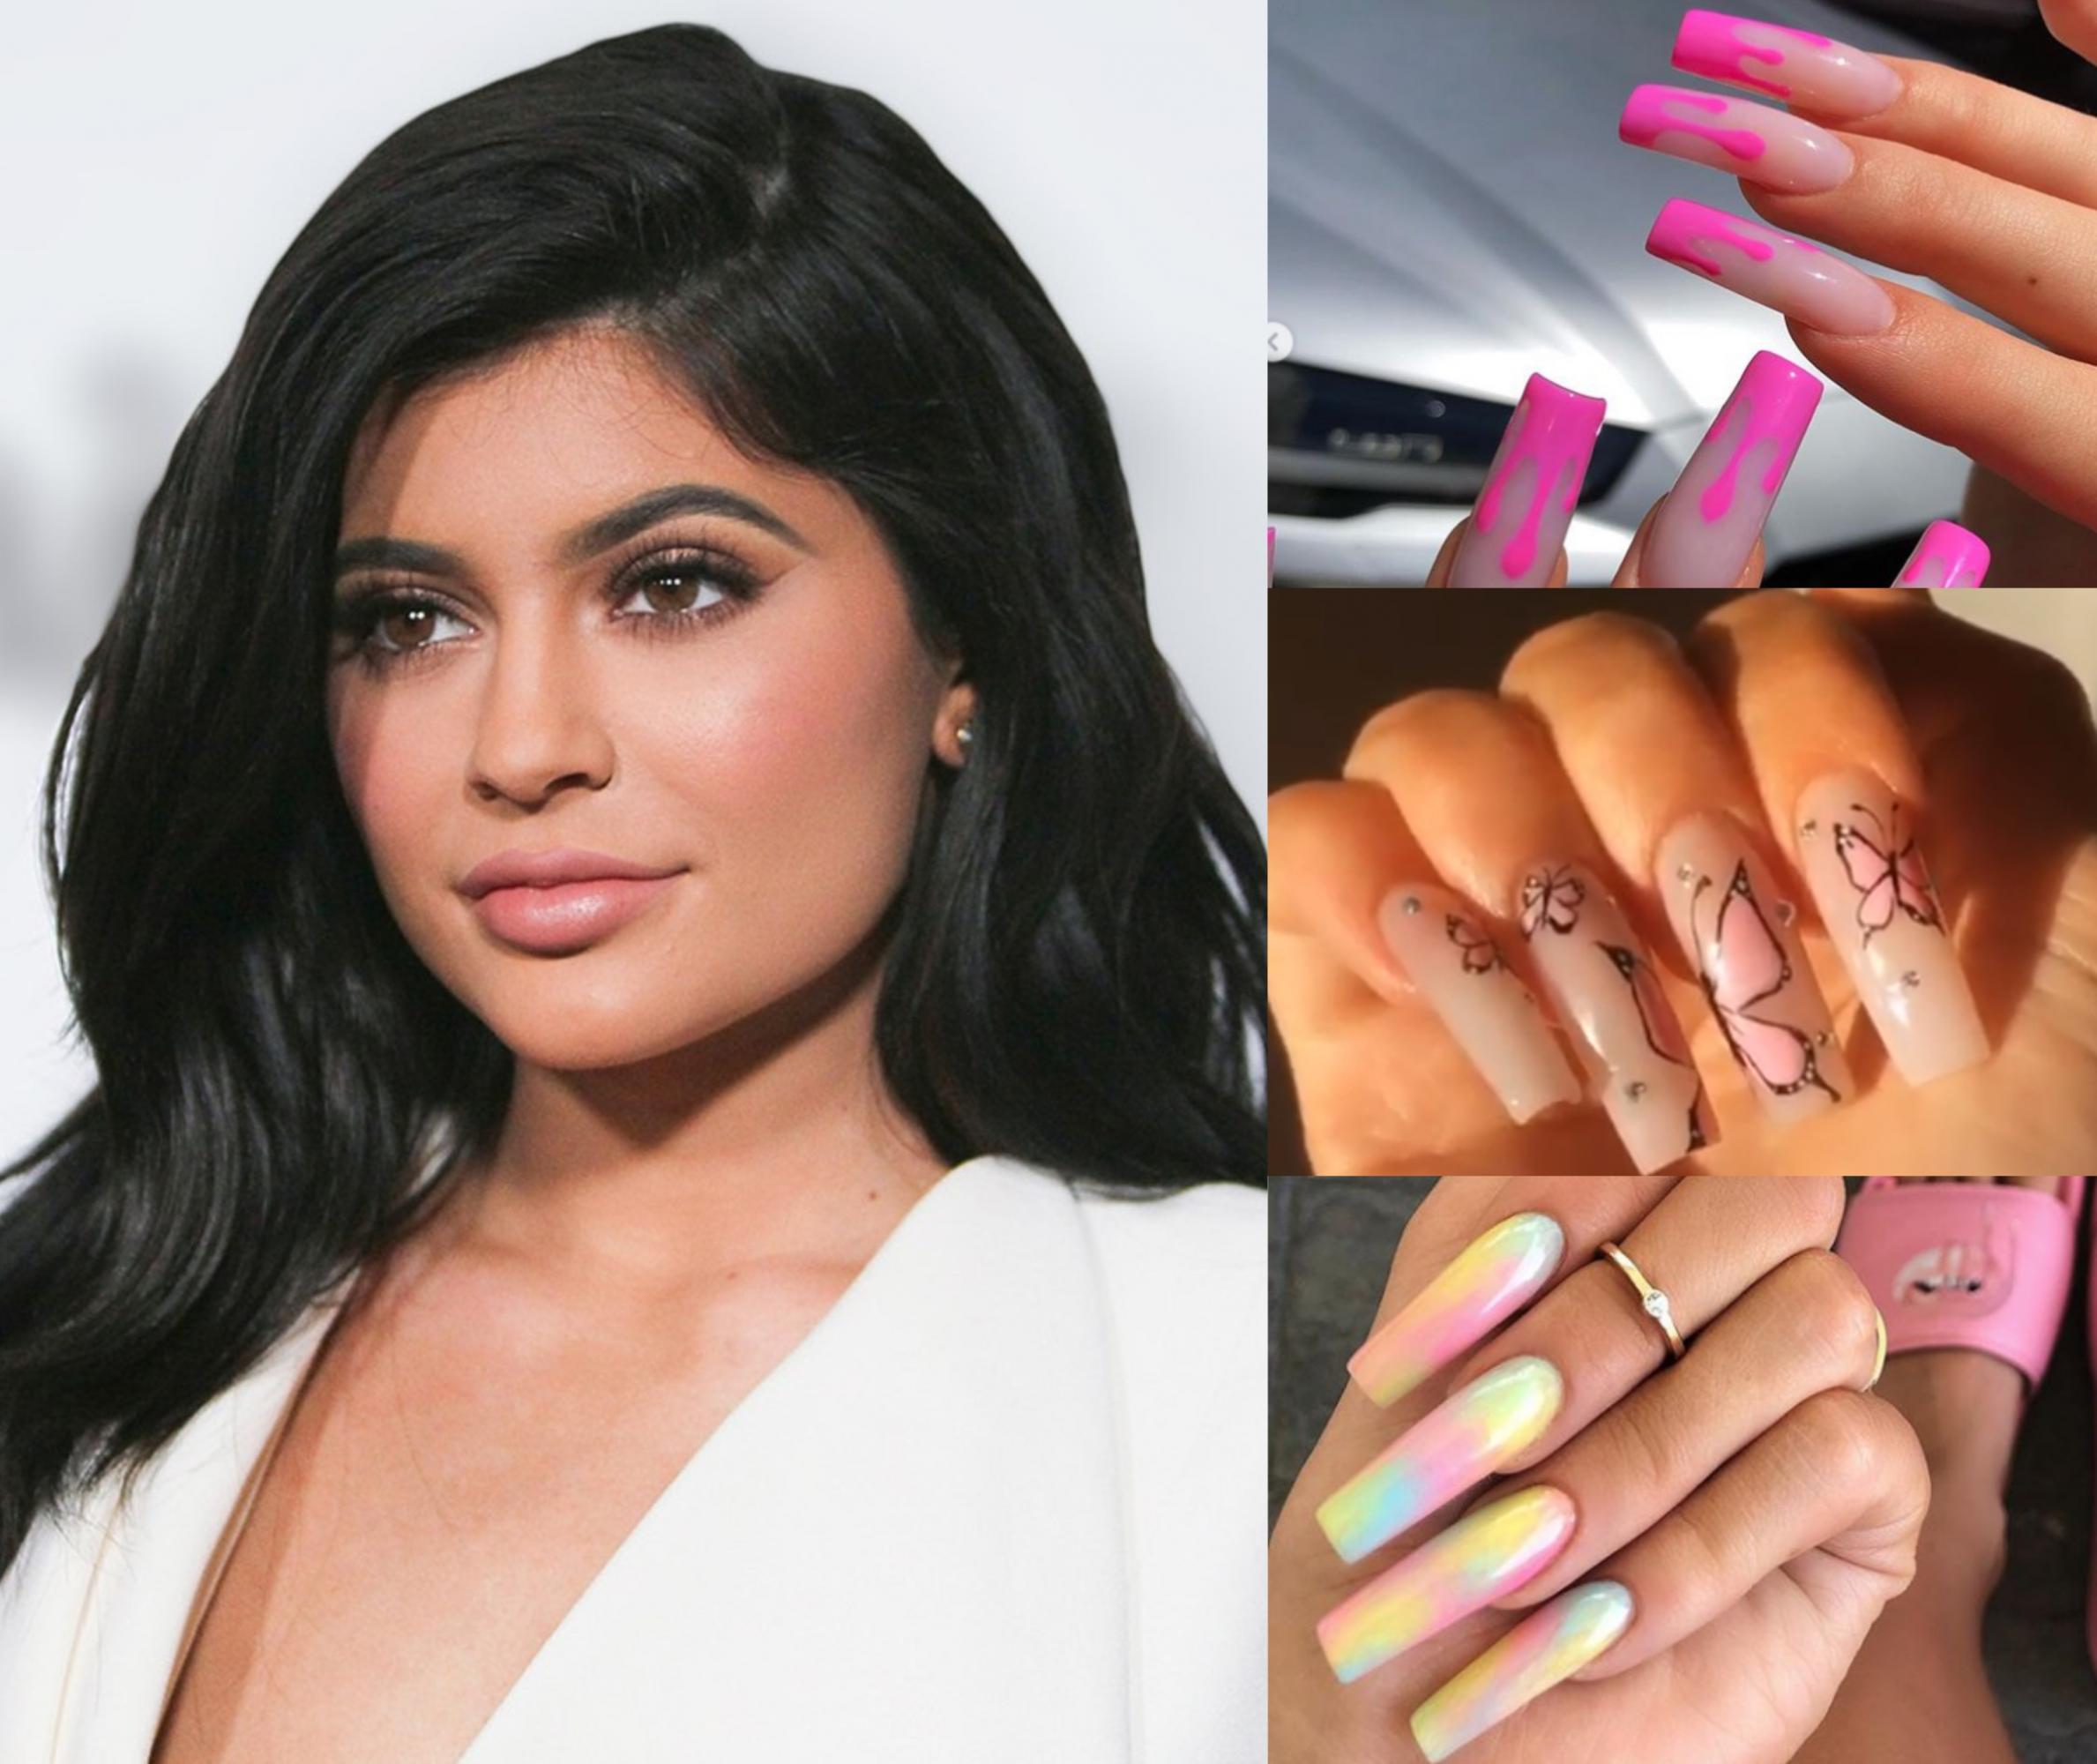 Kylie Jenner's New Nail Art Trends: From French Drip to Butterflies to  Tie-Dye Designs - Masala